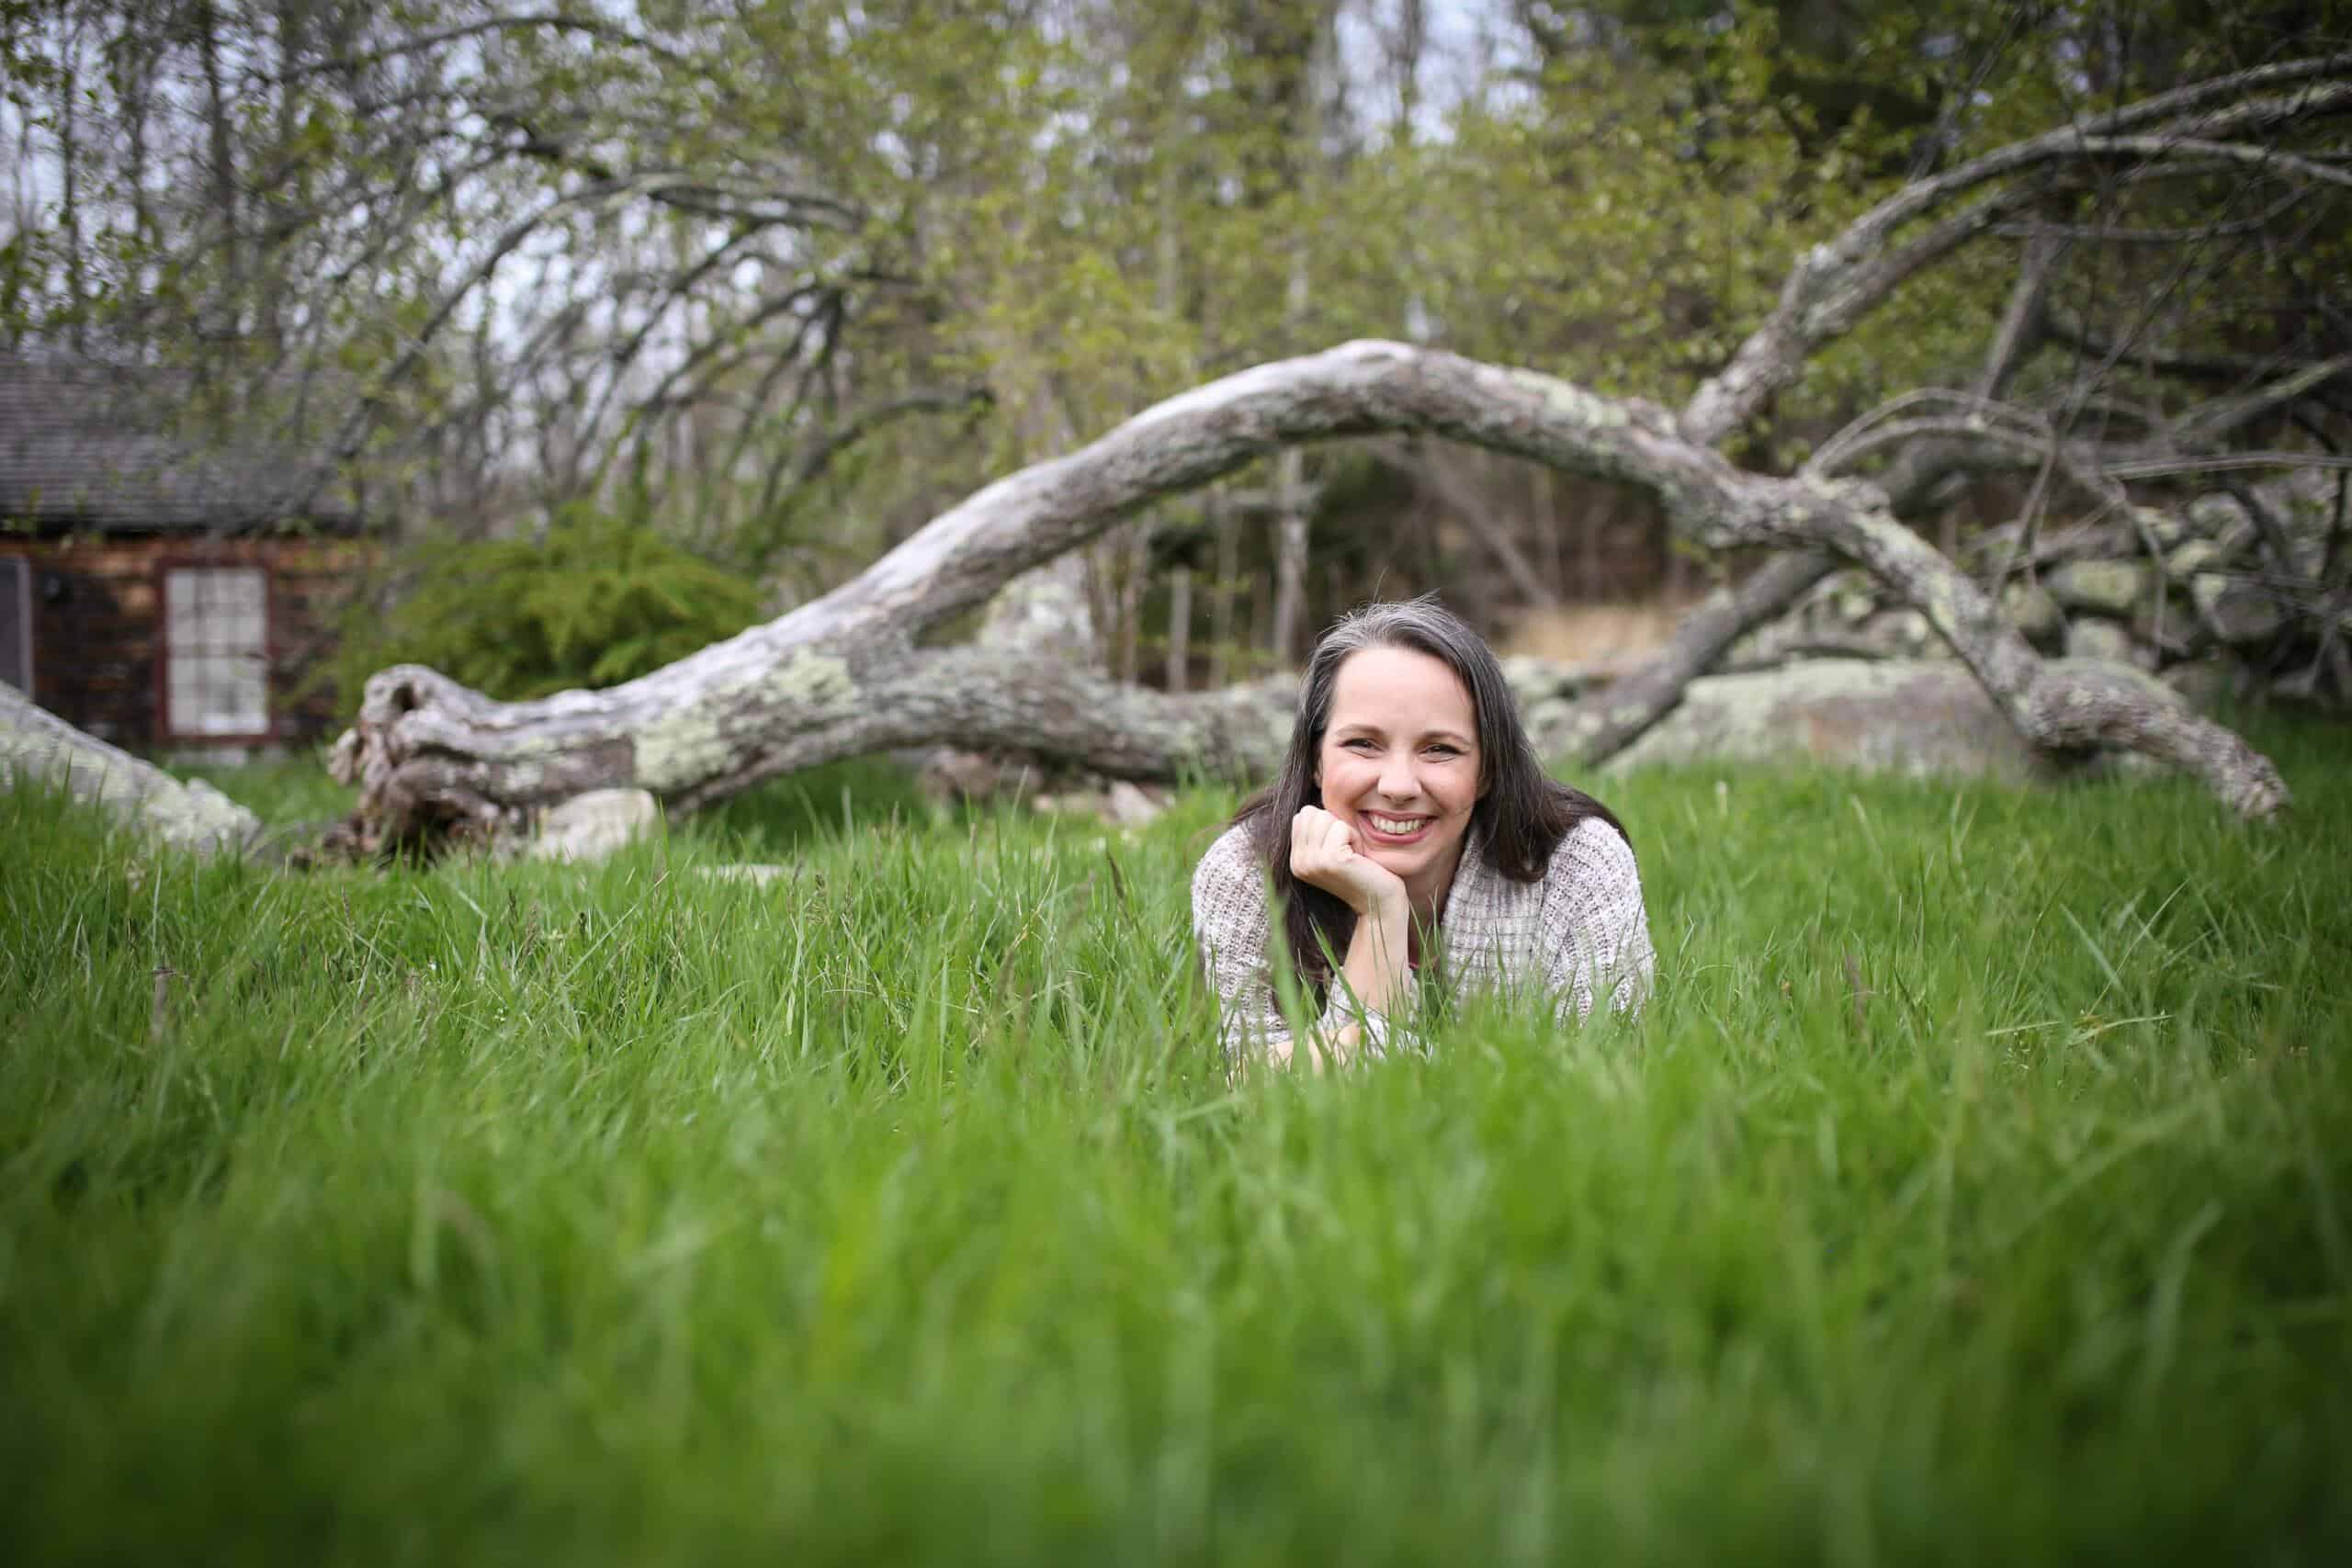 Lynn Turcotte-Schuh lying in a field of grass with a fallen tree in the background